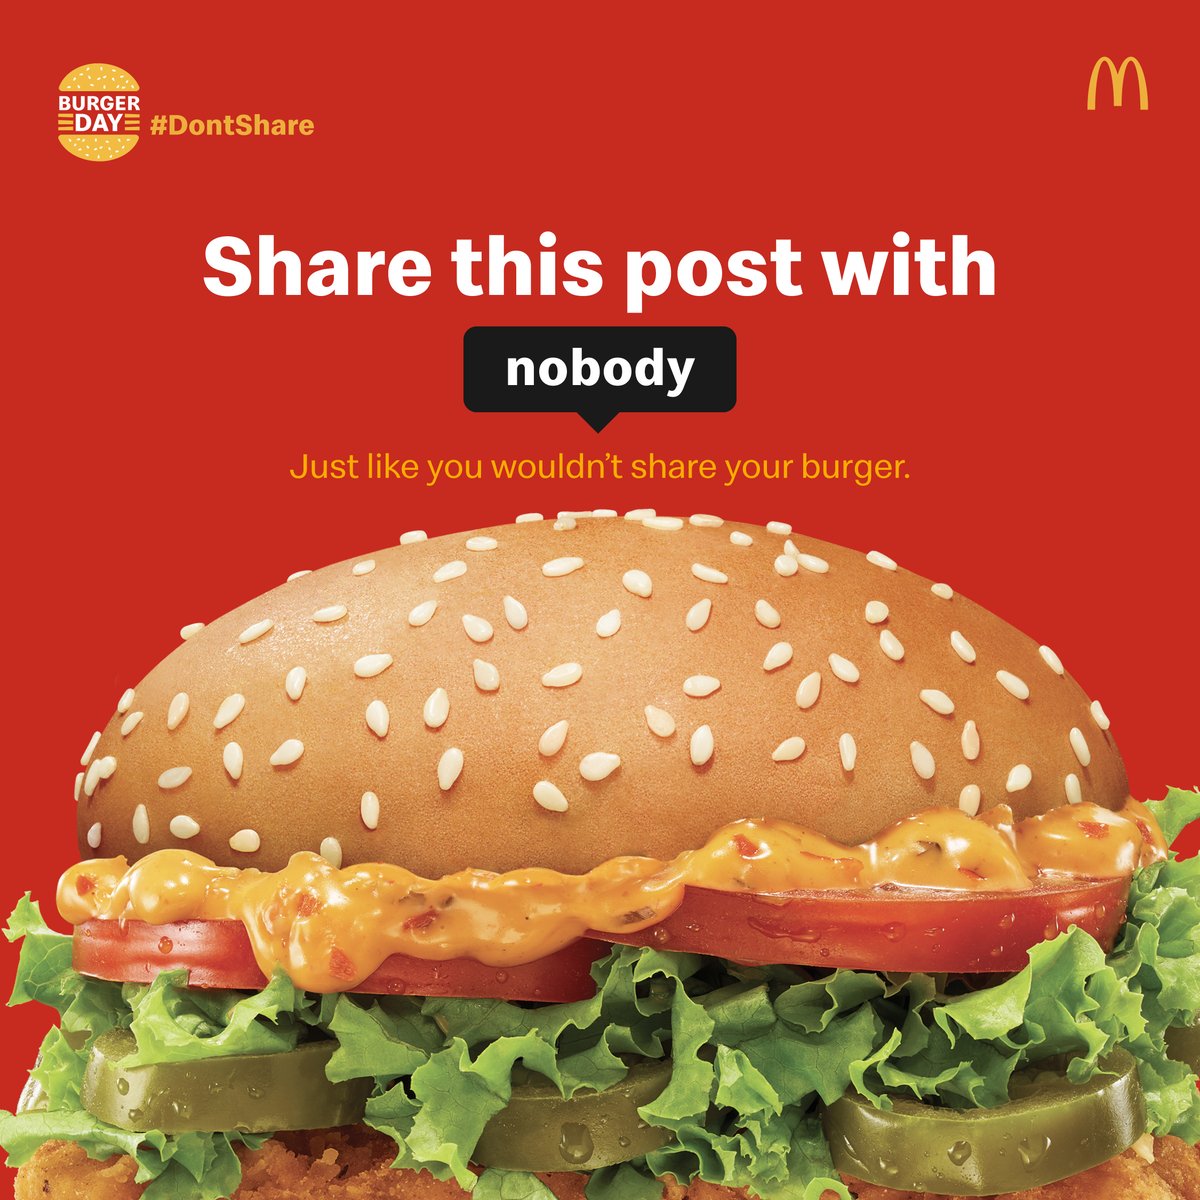 Go ahead. Share it with #nobody
Bun-derful offers await you on the other side!

#InternationalBurgerDay #BurgerDay #McDonalds